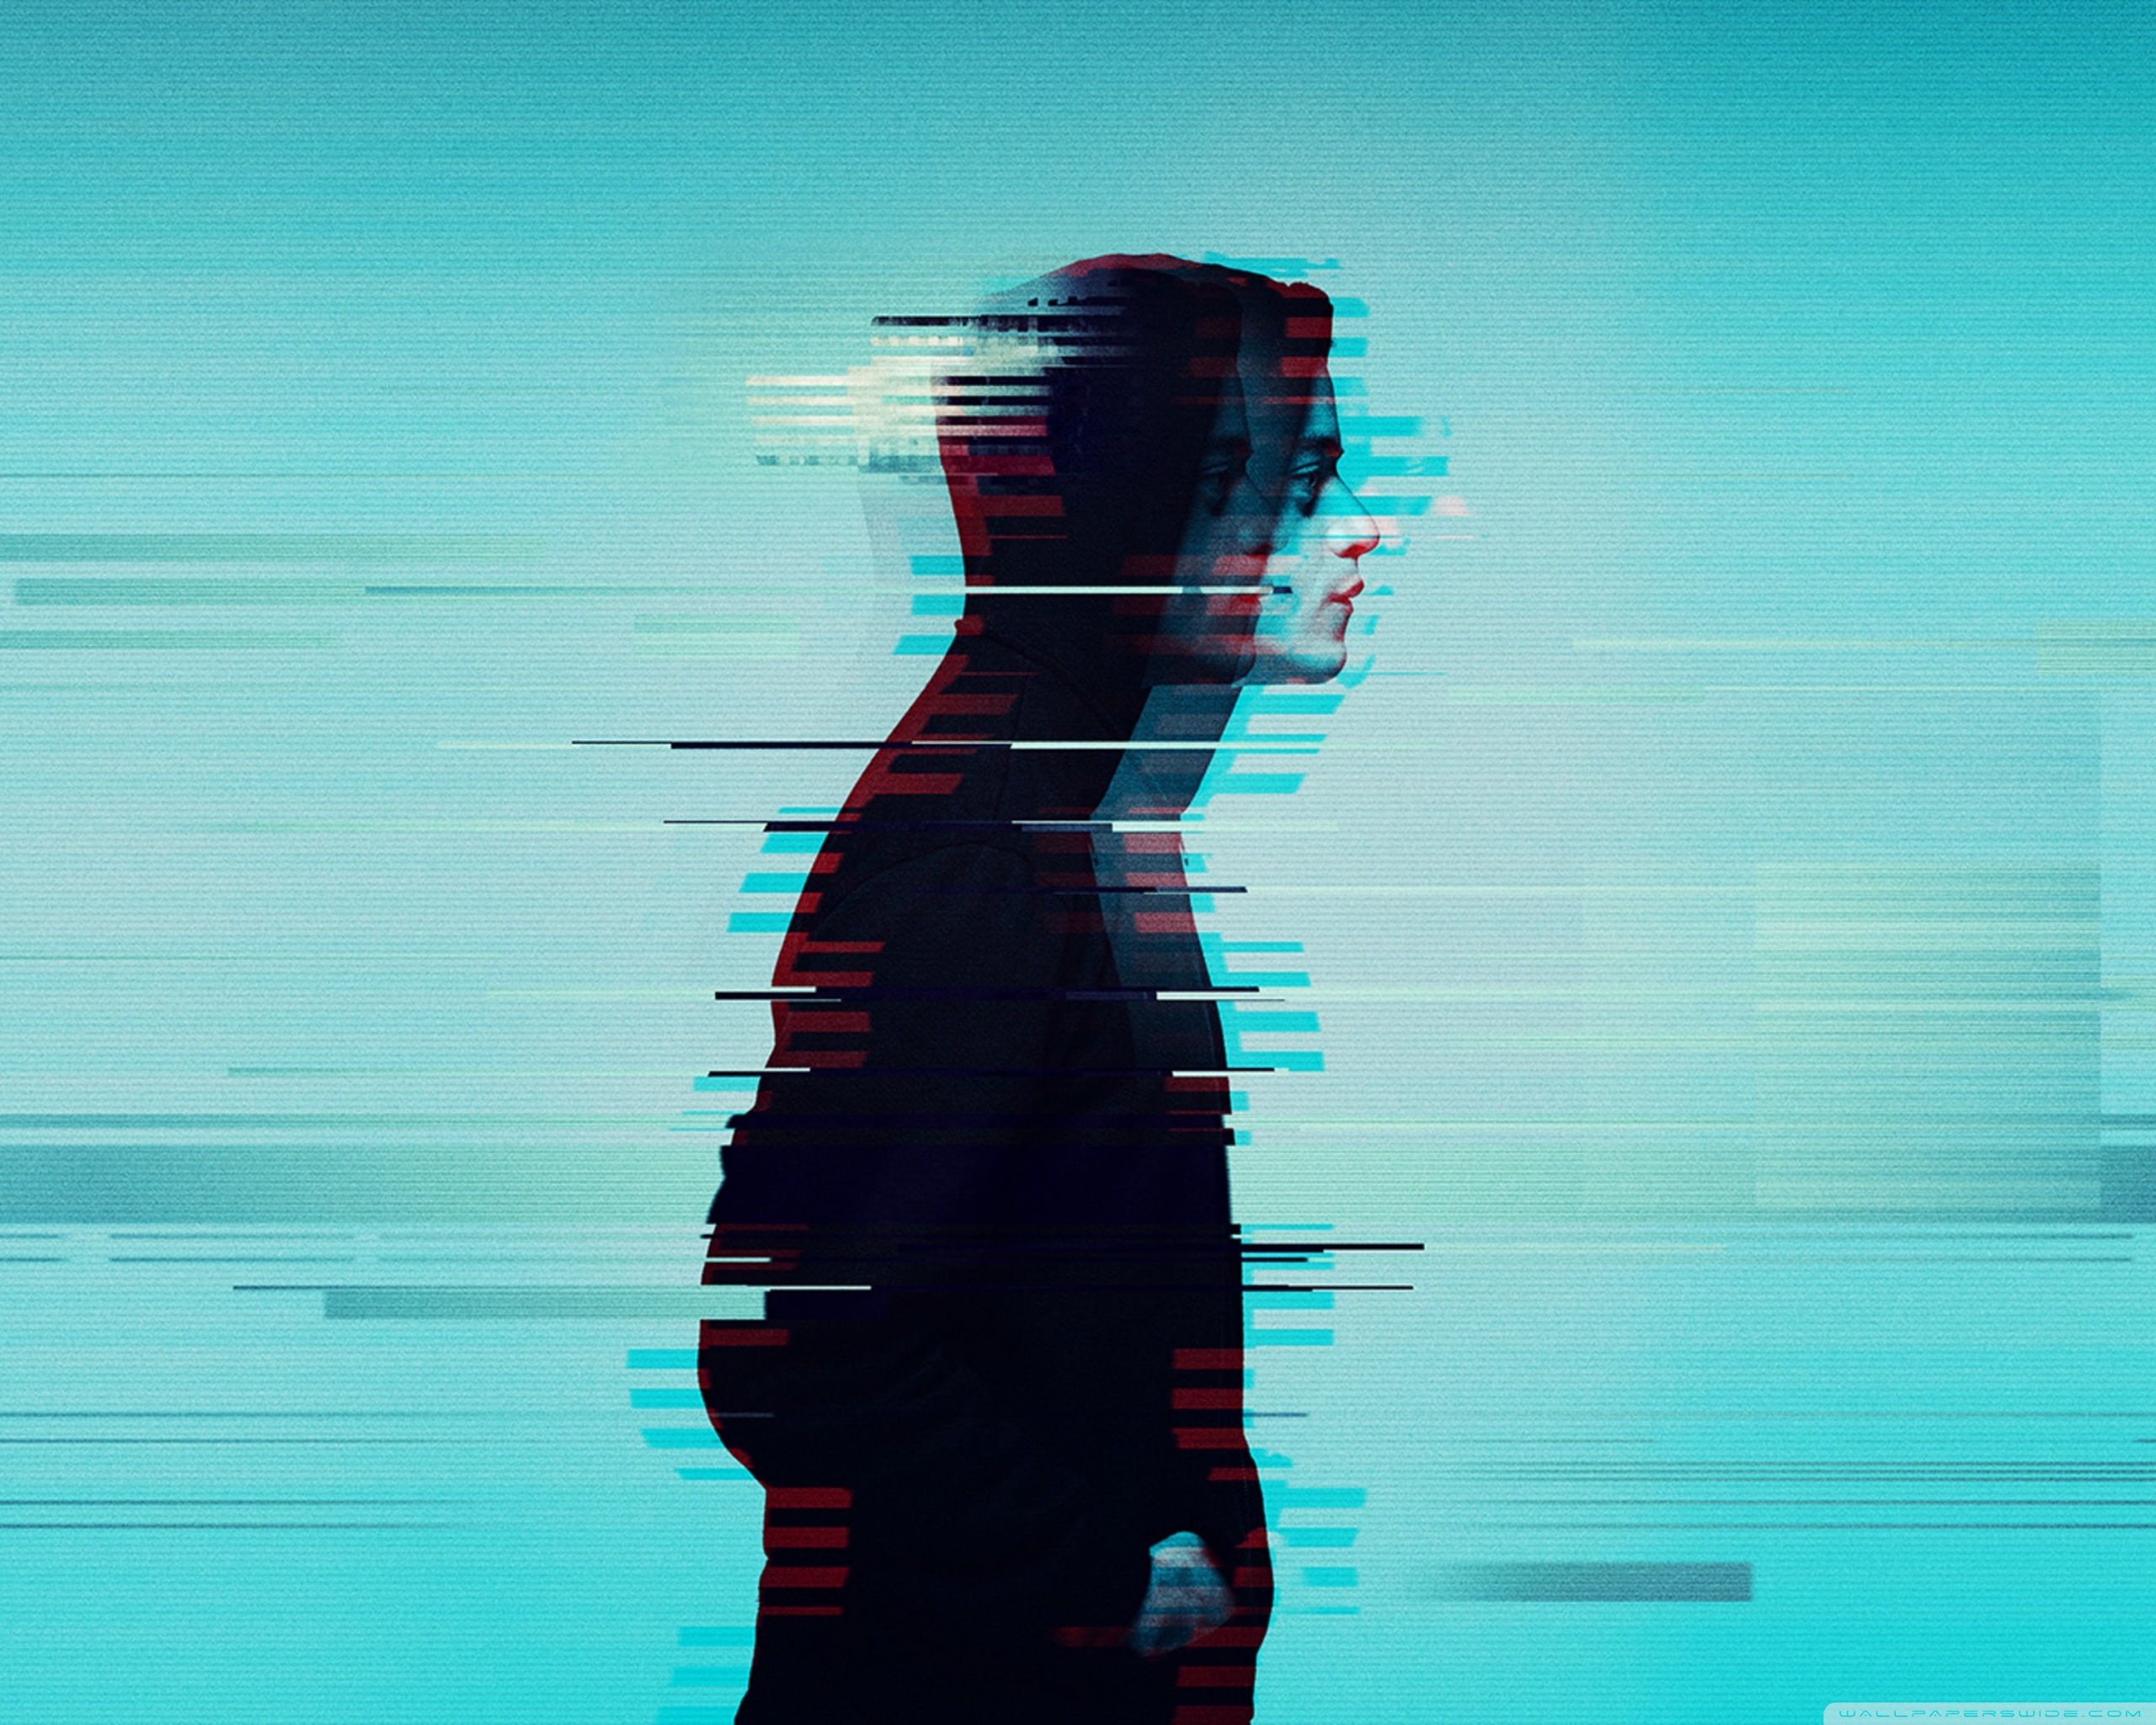 Mr Robot Elliot 4k Wallpaper,HD Tv Shows Wallpapers,4k Wallpapers,Images, Backgrounds,Photos and Pictures